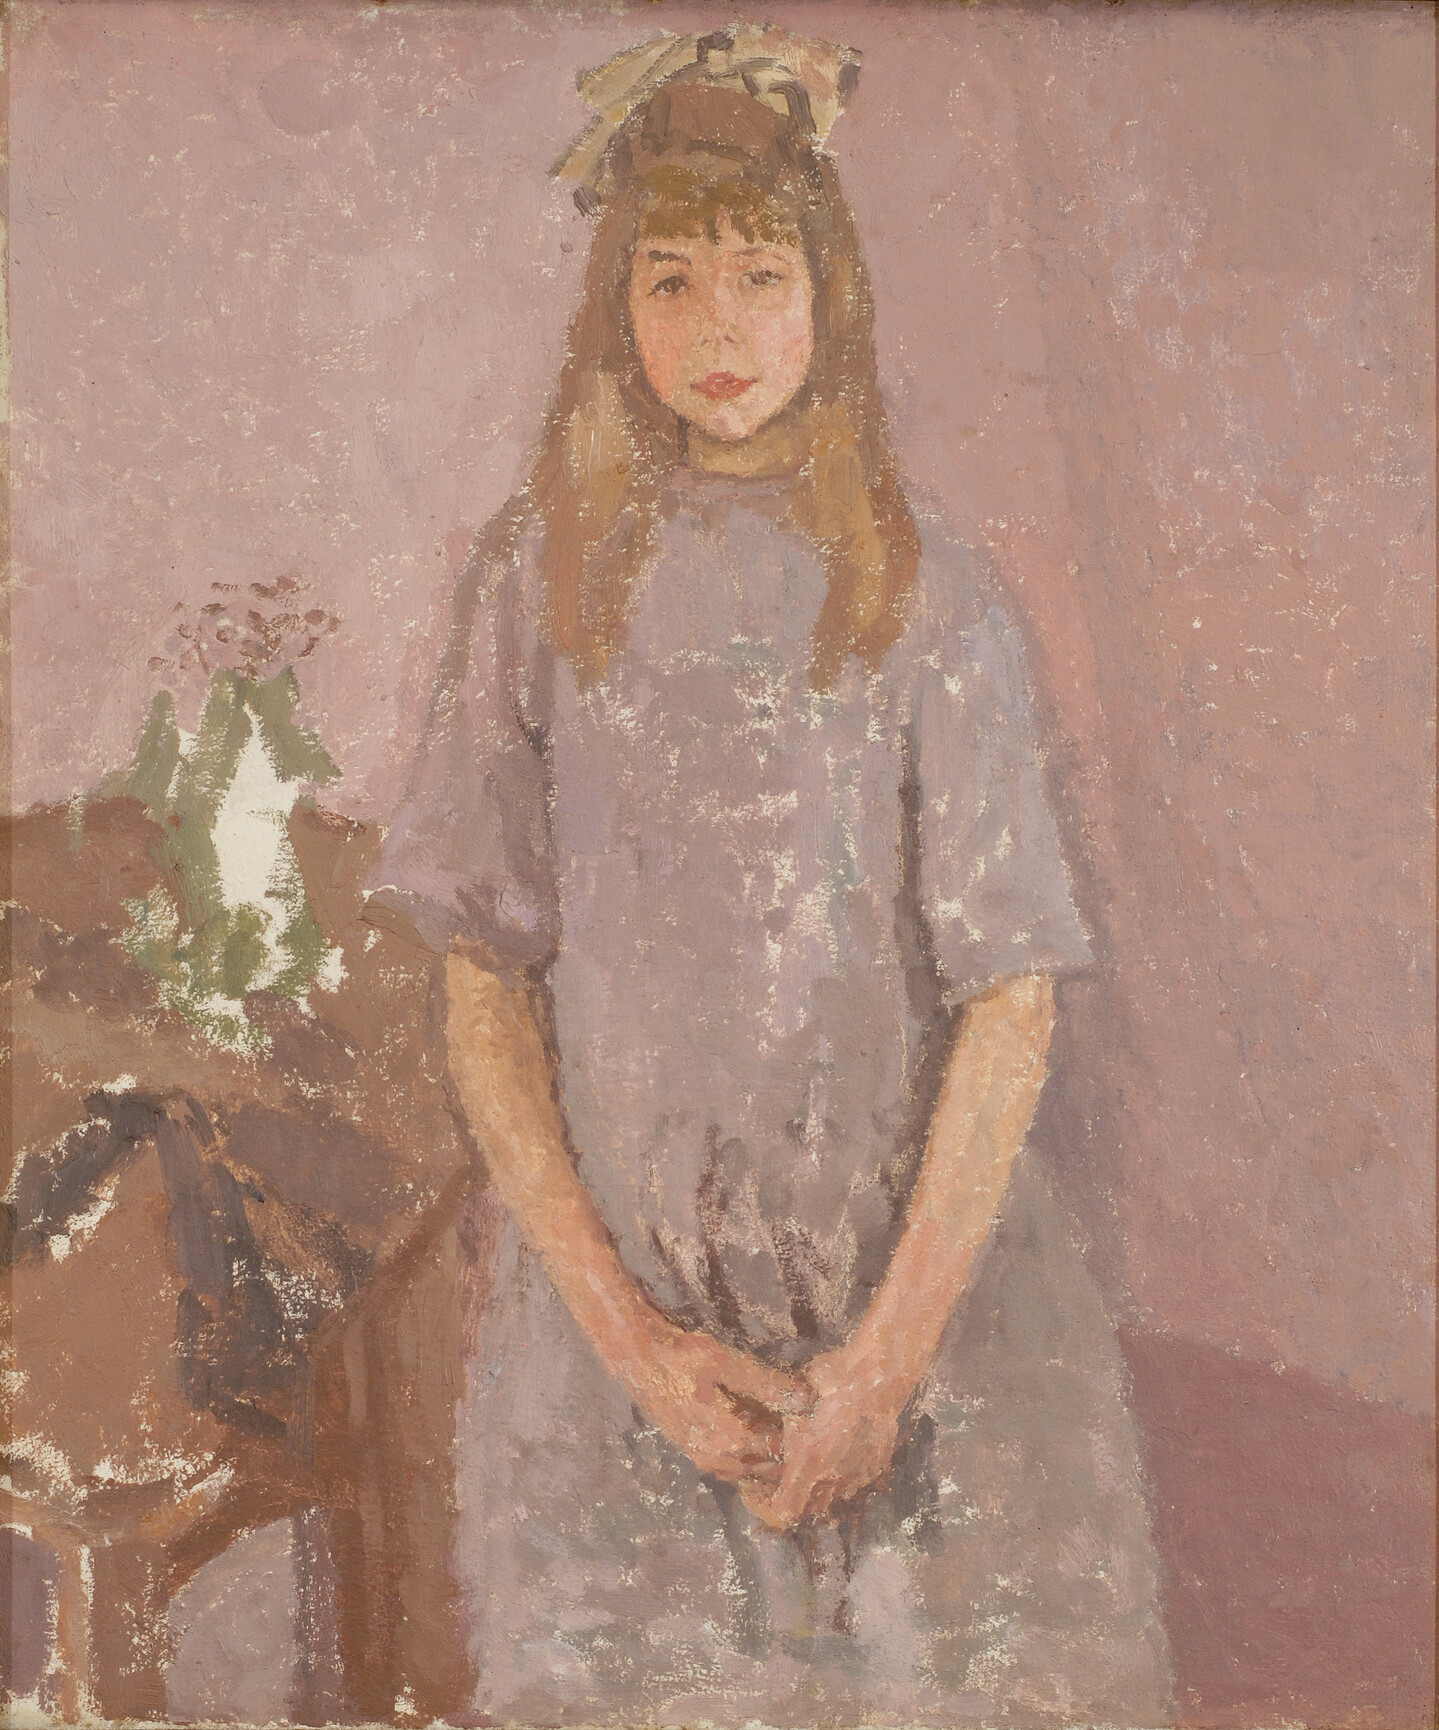 Against a loosely painted purple-pink background, a girl with light skin tone and long light-brown hair stands with her hands clasped, looking directly out at the viewer.